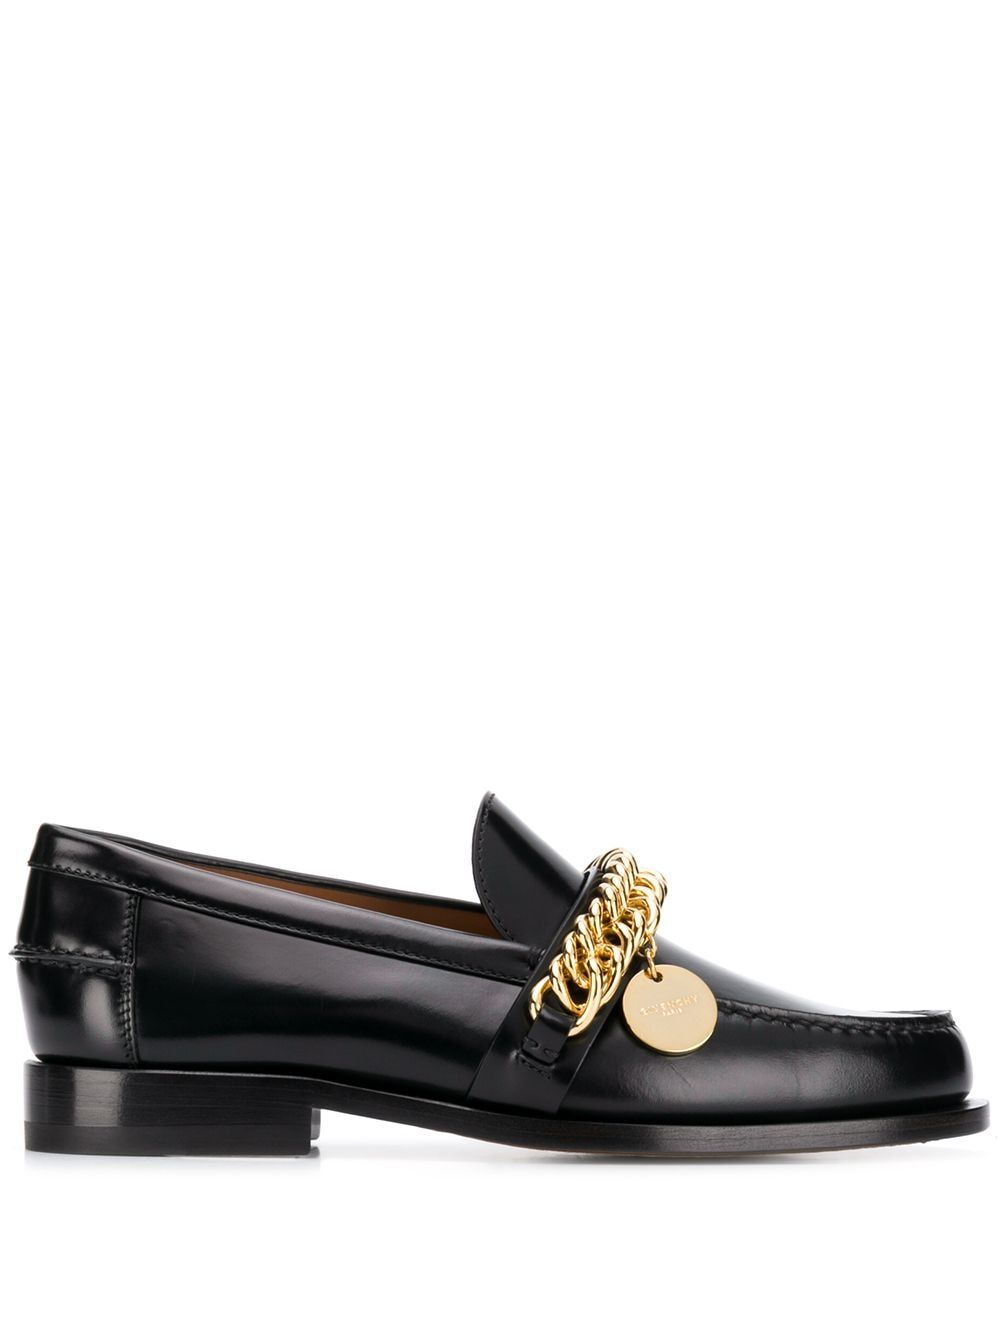 loafer boot price